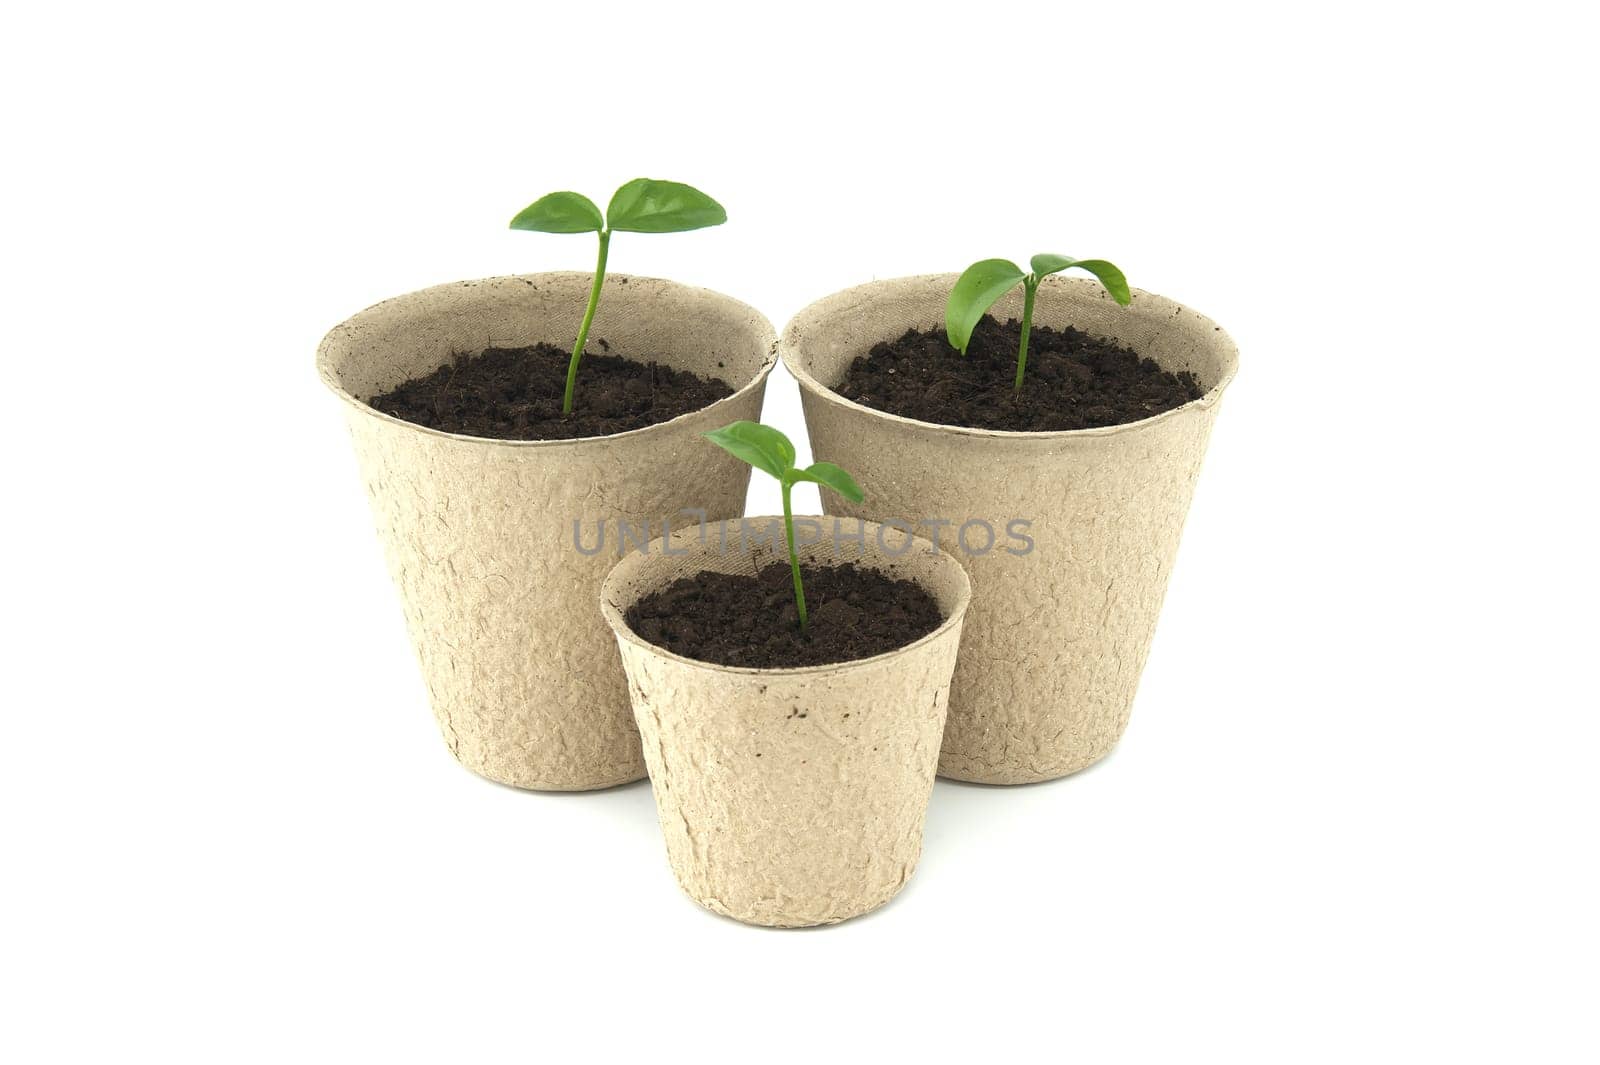 Green seedlings sprouting from biodegradable pots on white by NetPix